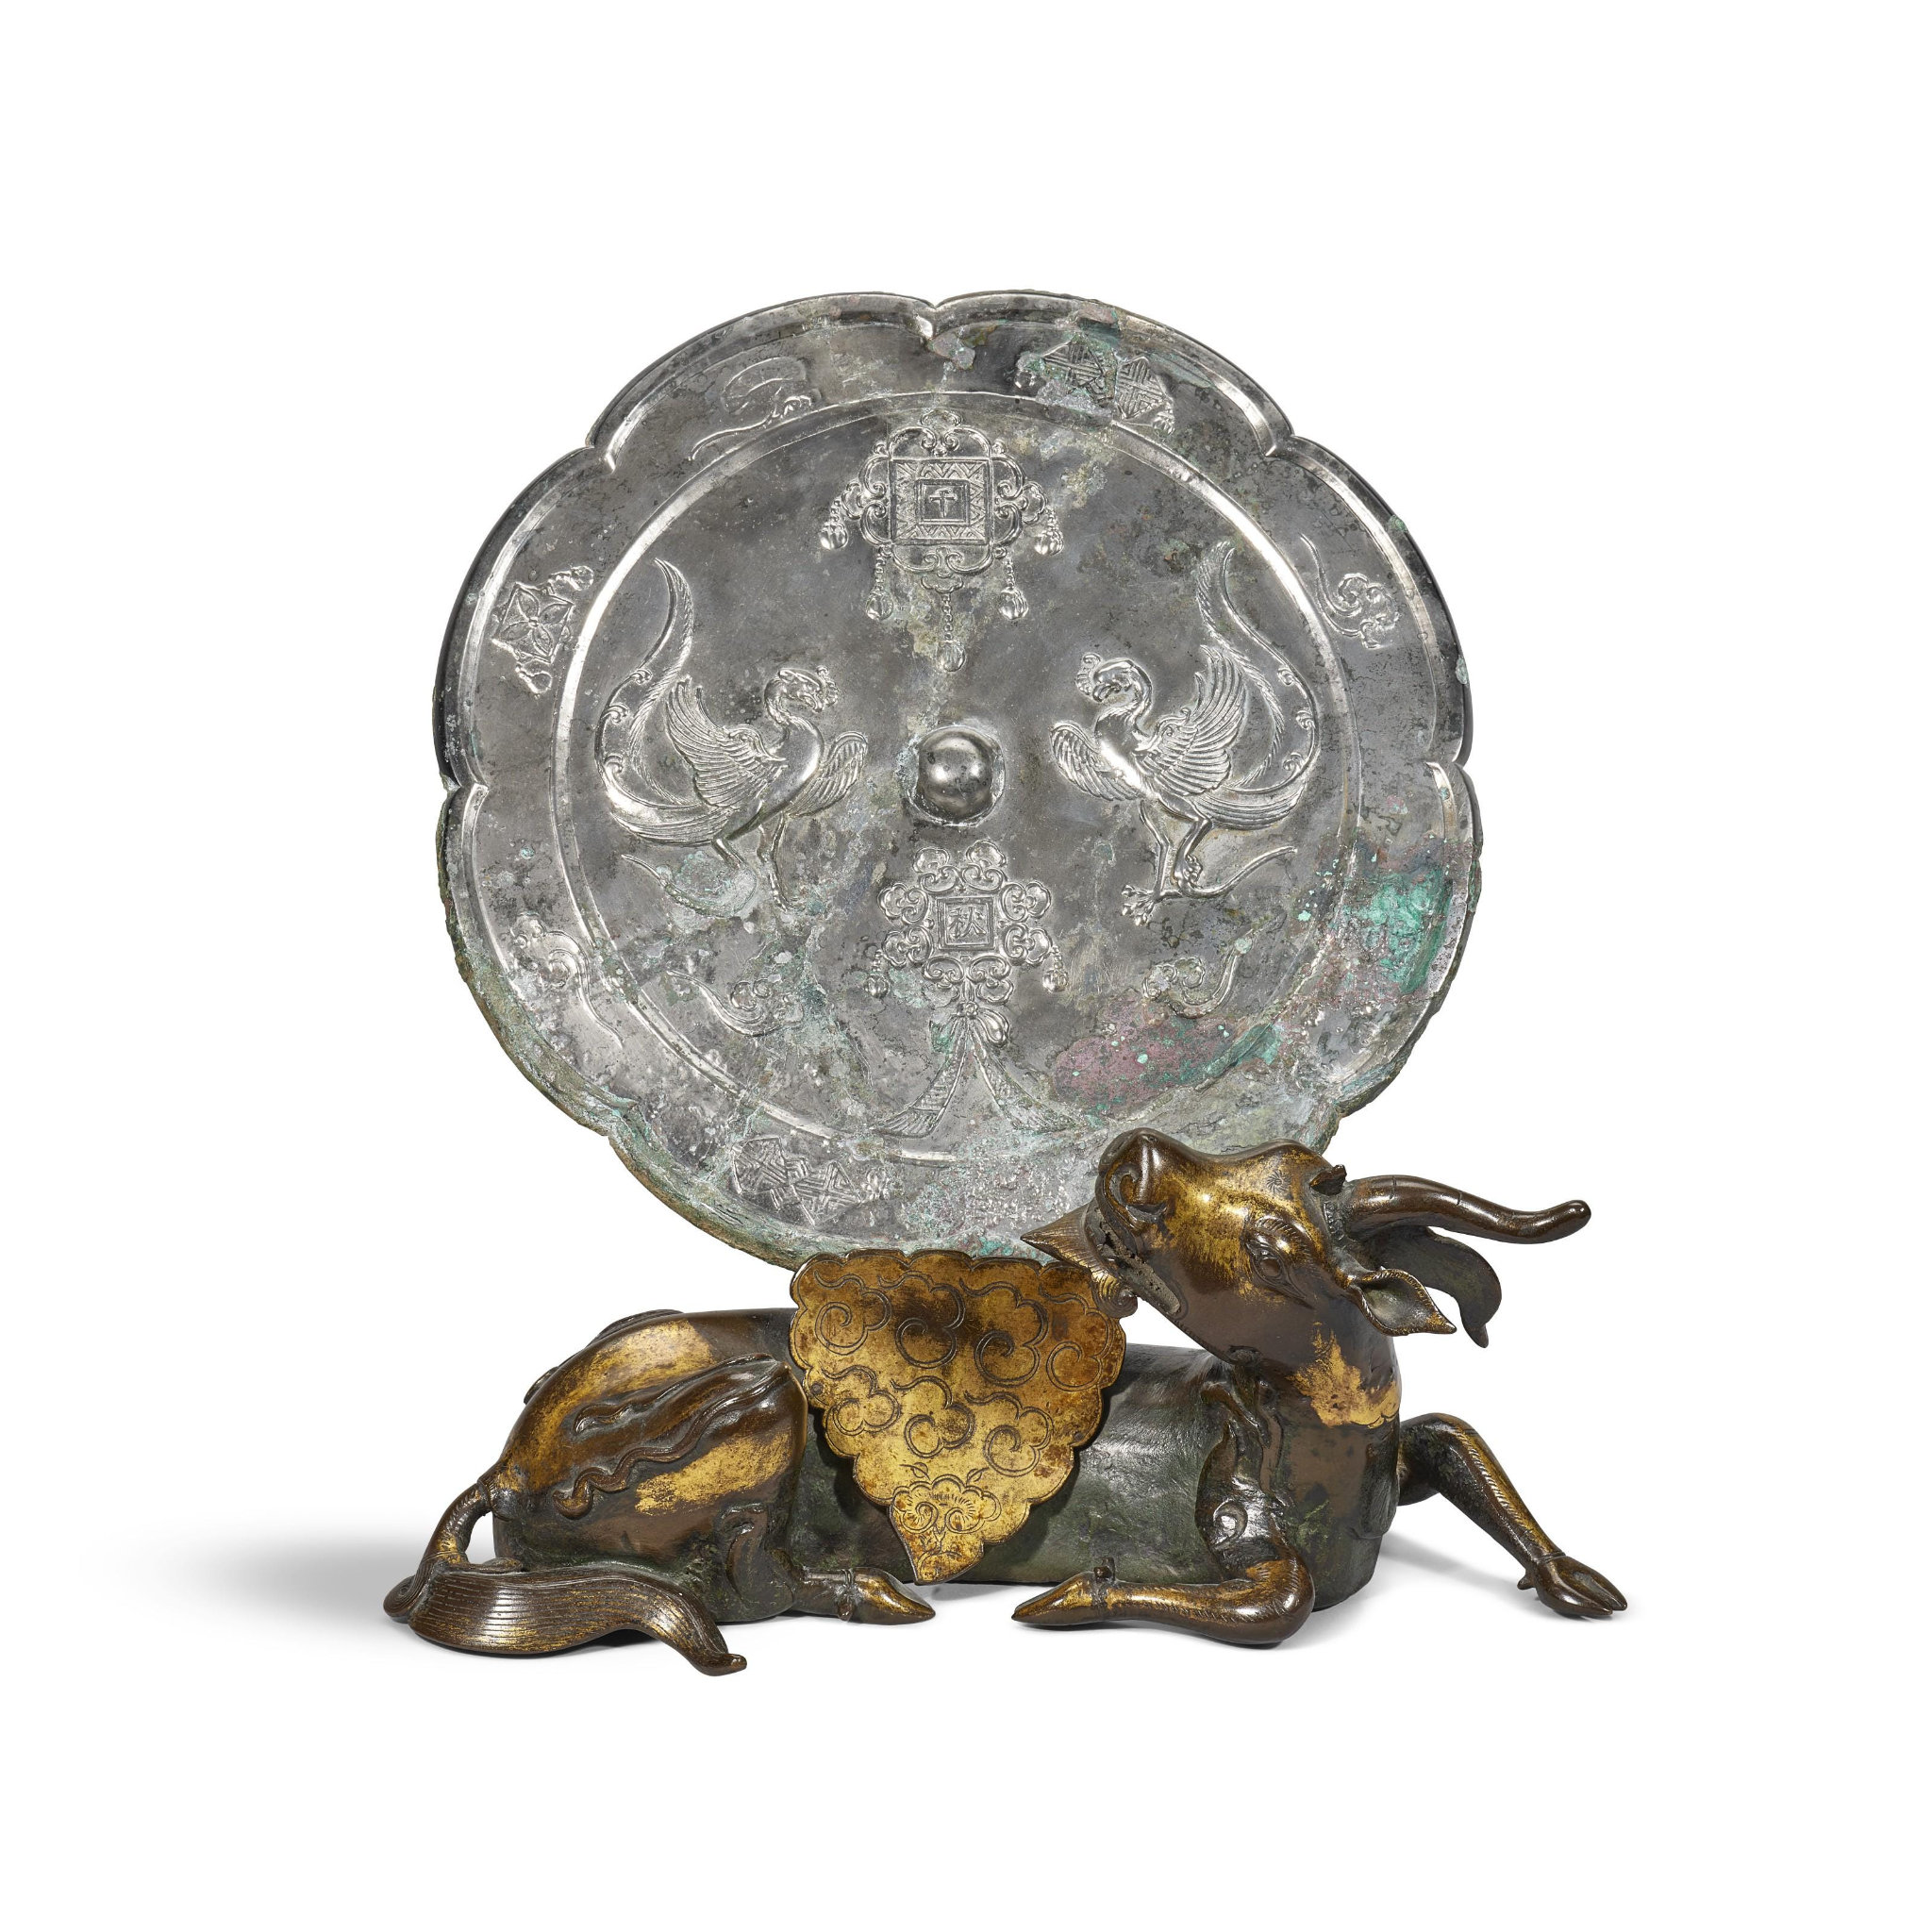 Liao dynasty (907-1125) bronze mirror and a parcel-gilt bronze mythical beast-form mirror stand, Yuan-Ming Dynasty (1279-1644)